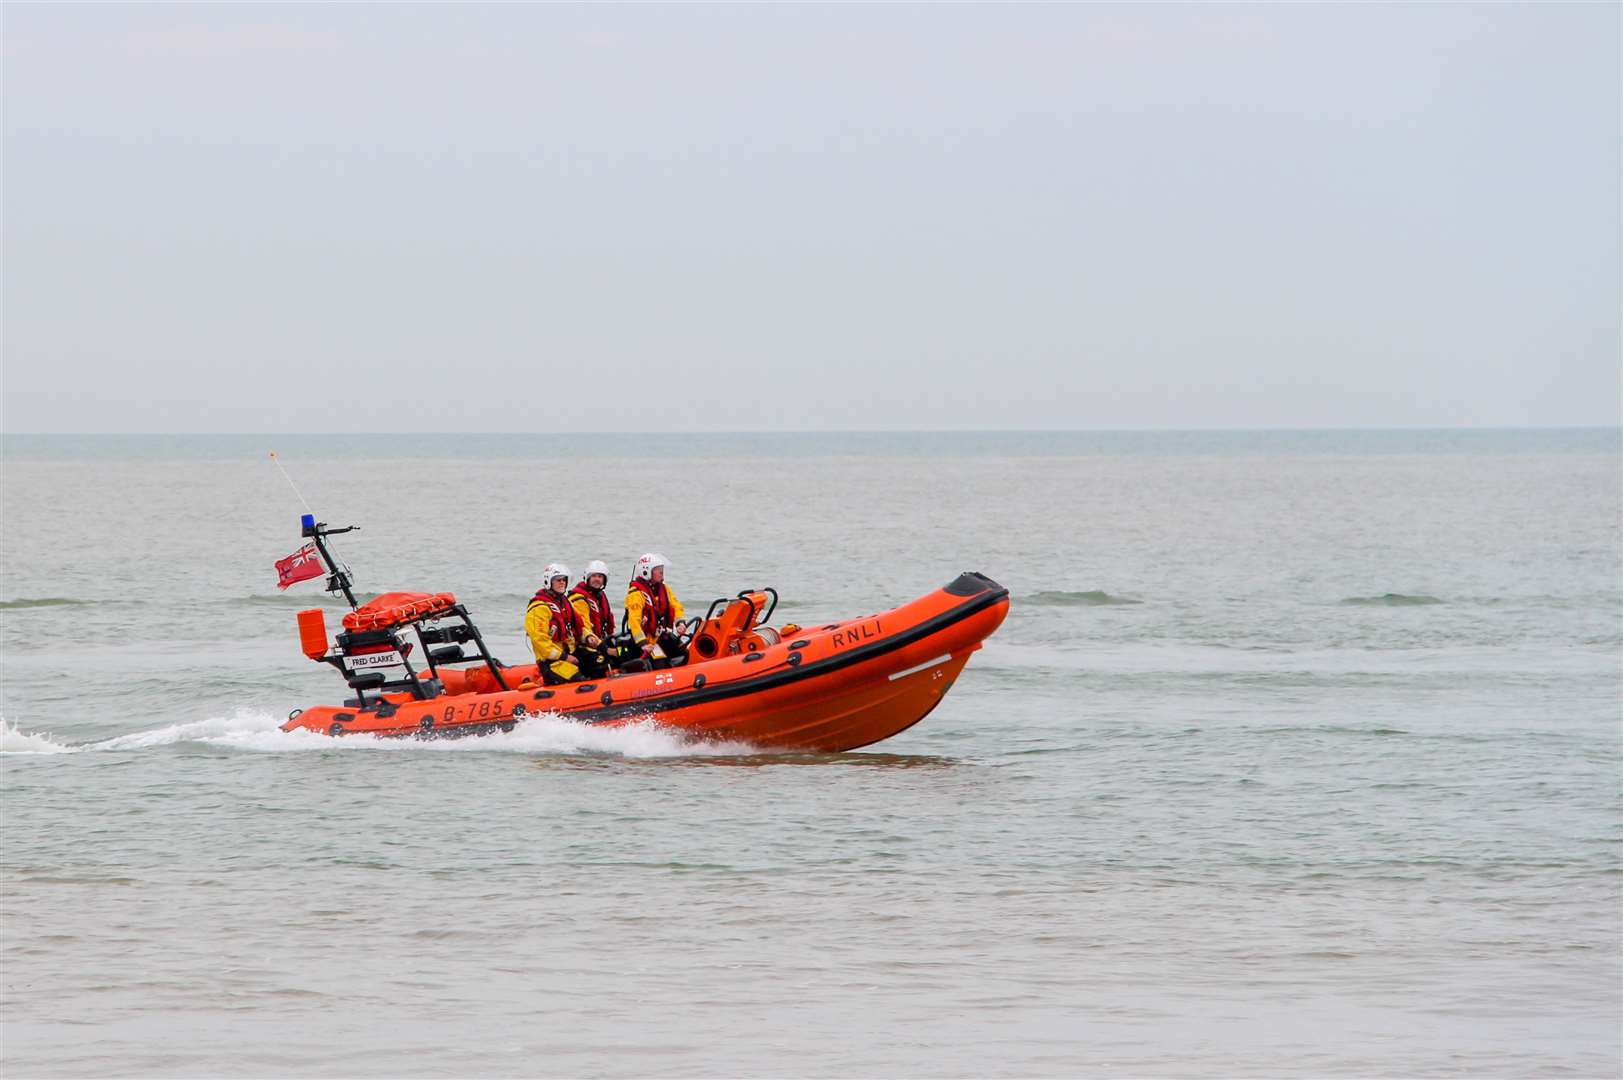 RNLI crew members rescued the group